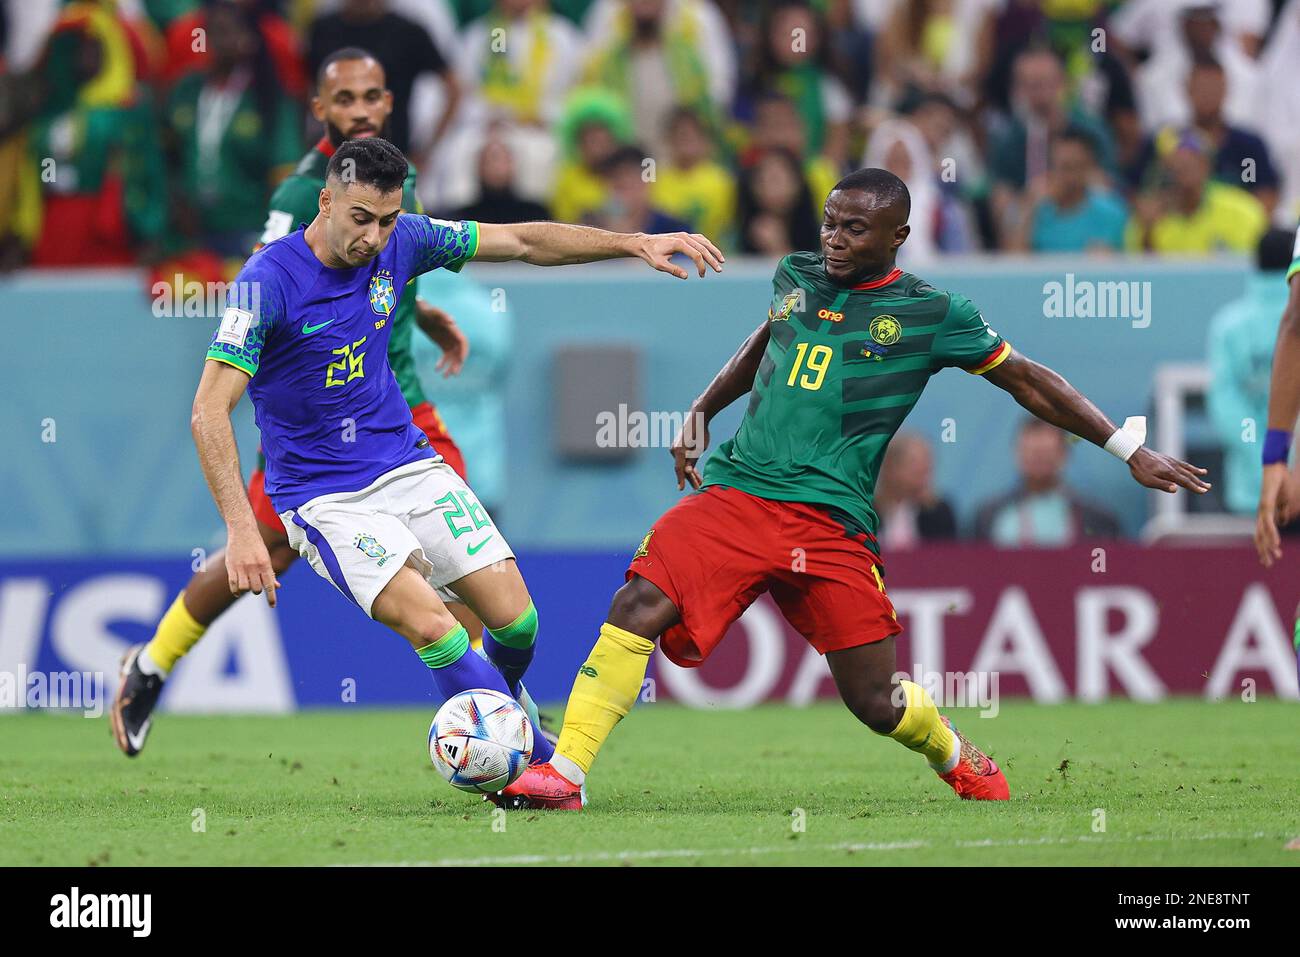 LUSAIL CITY, QATAR - DECEMBER 02: Gabriel Martinelli, Collins Fai  during the FIFA World Cup Qatar 2022 Group G match between Cameroon and Brazil at Lusail Stadium on December 02, 2022 in Lusail City, Qatar. (Photo by MB Media) Stock Photo